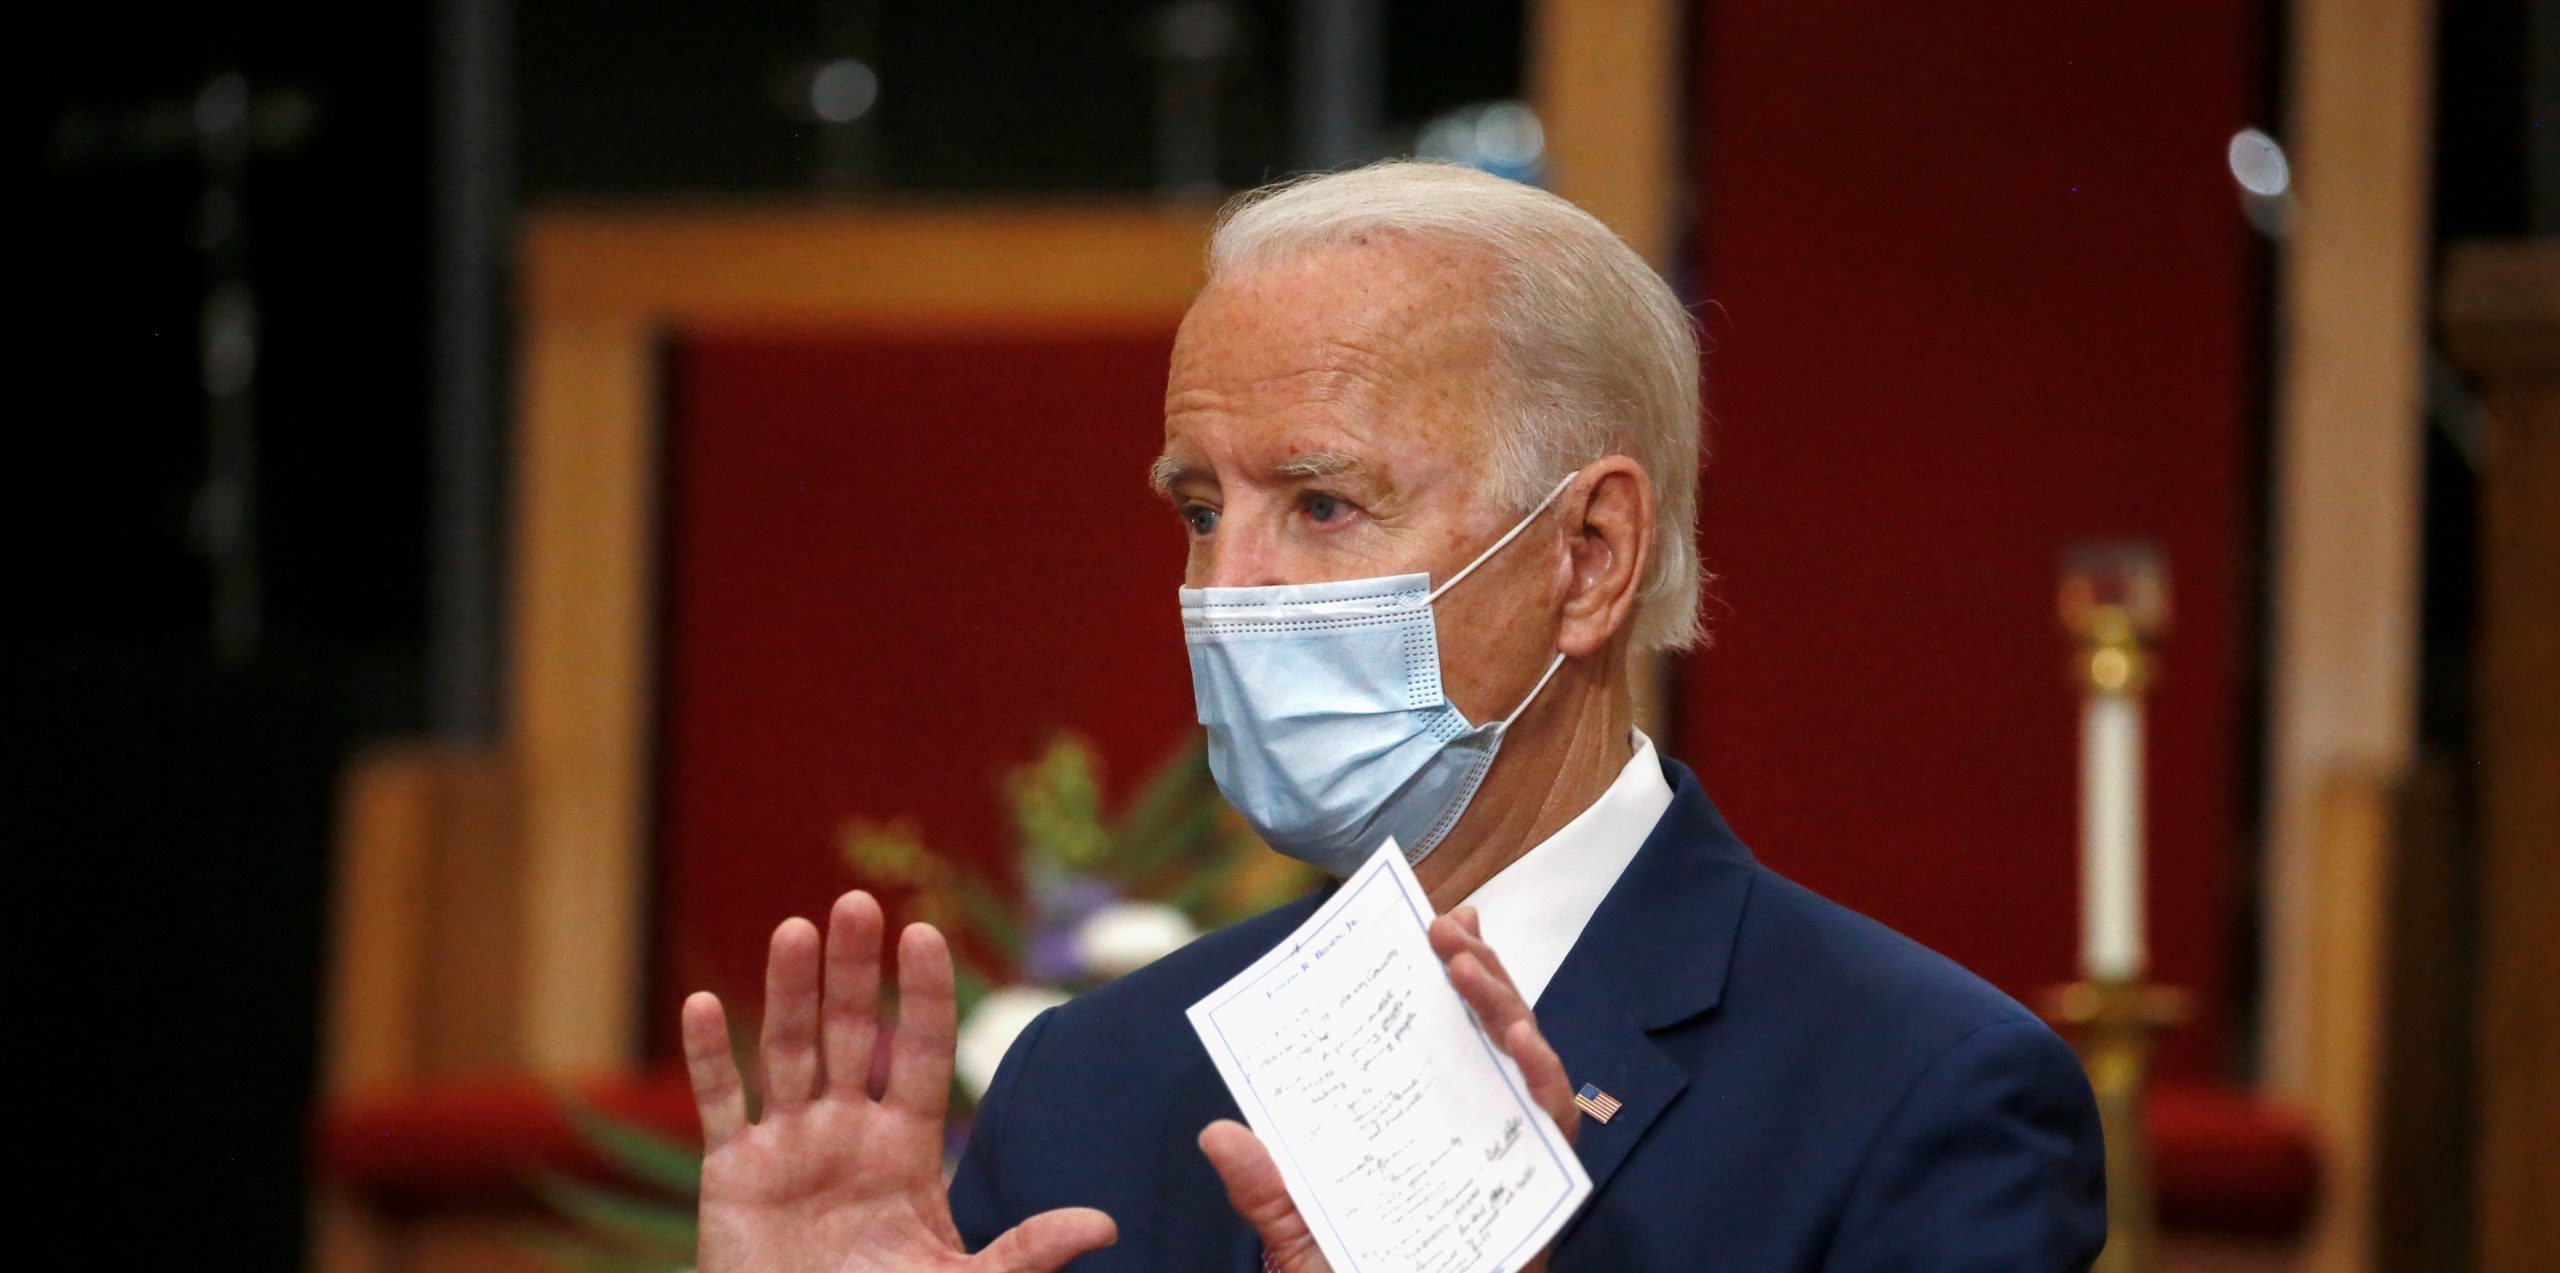 U.S. Democratic presidential candidate and former Vice President Joe Biden visits the Bethel AME Church in Wilmington U.S. Democratic presidential candidate and former Vice President Joe Biden wears a protective face mask as he speaks during a visit to the Bethel AME Church in Wilmington, Delaware, U.S. June 1, 2020. REUTERS/Jim Bourg JIM BOURG